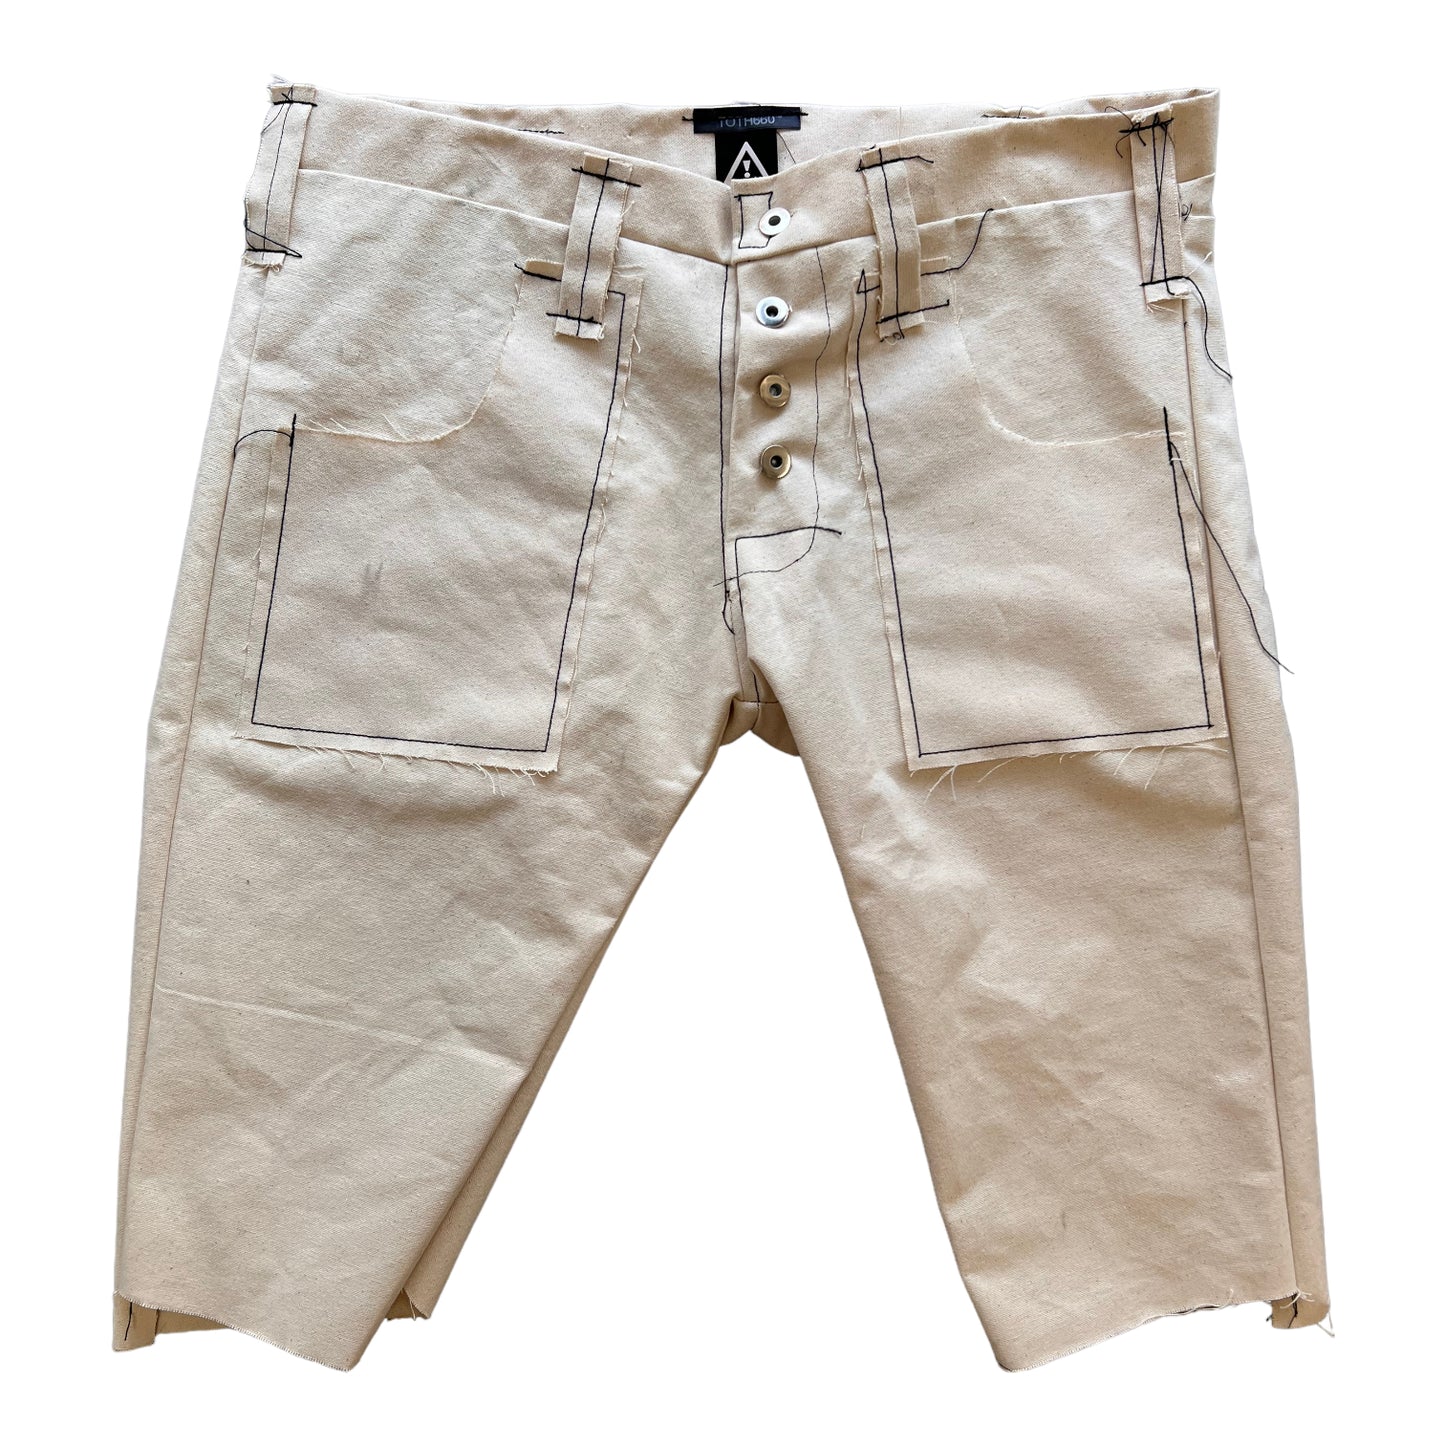 Toth 660 RAW canvas white shorts